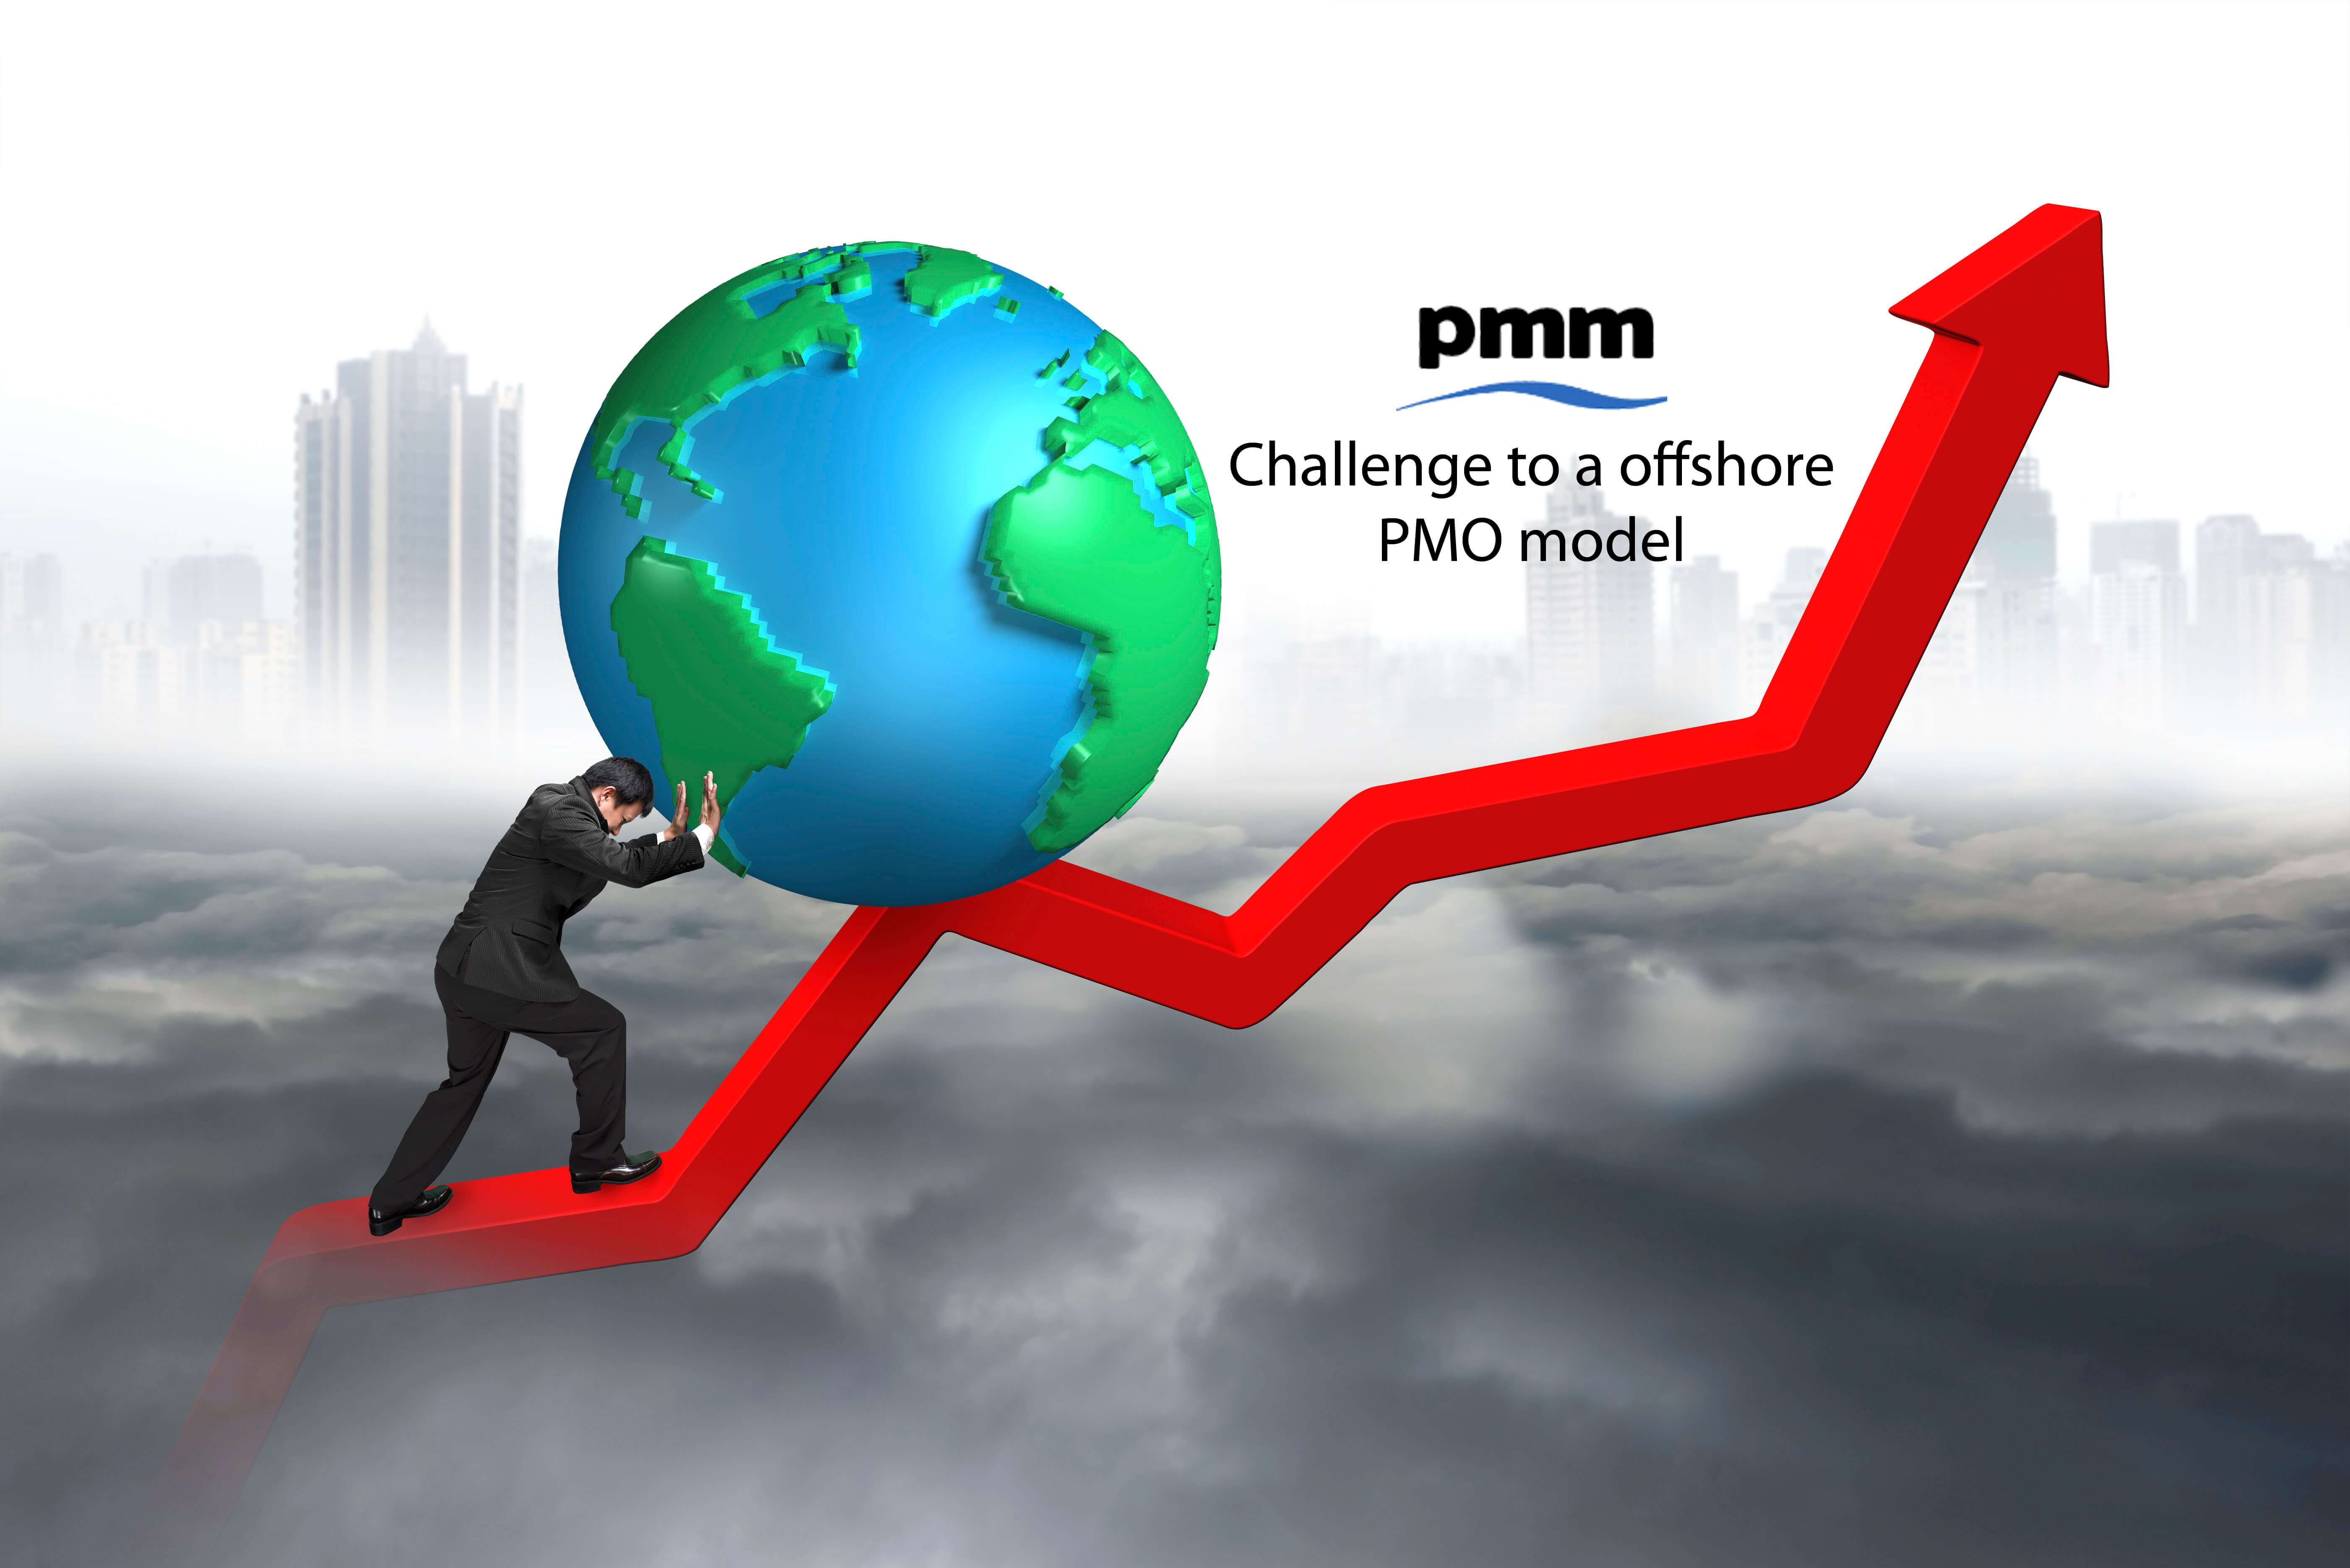 Challenges to a PMO offshore model